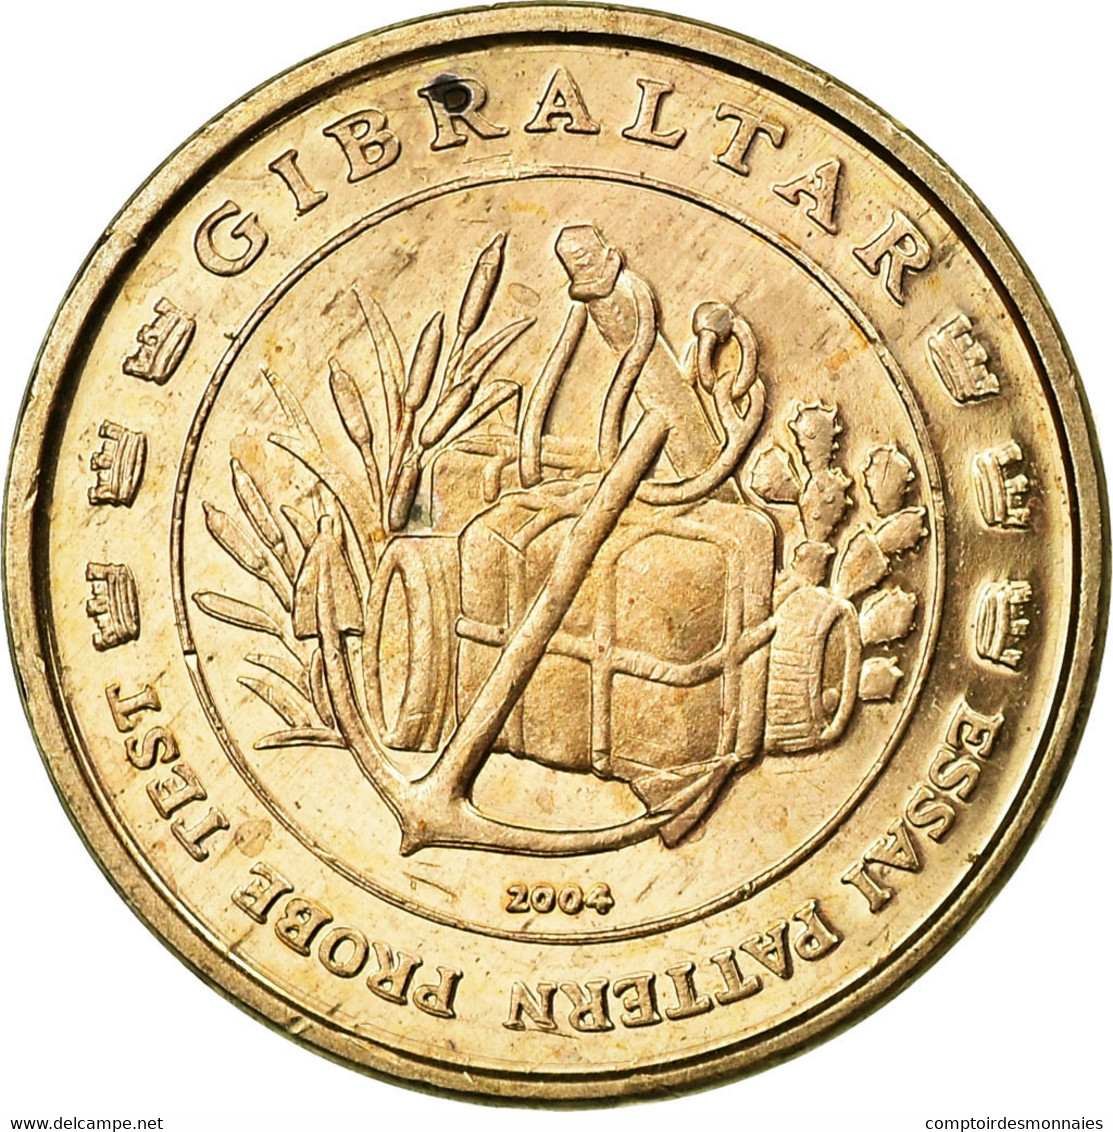 Gibraltar, Fantasy Euro Patterns, 5 Euro Cent, 2004, FDC, Copper Plated Steel - Privatentwürfe